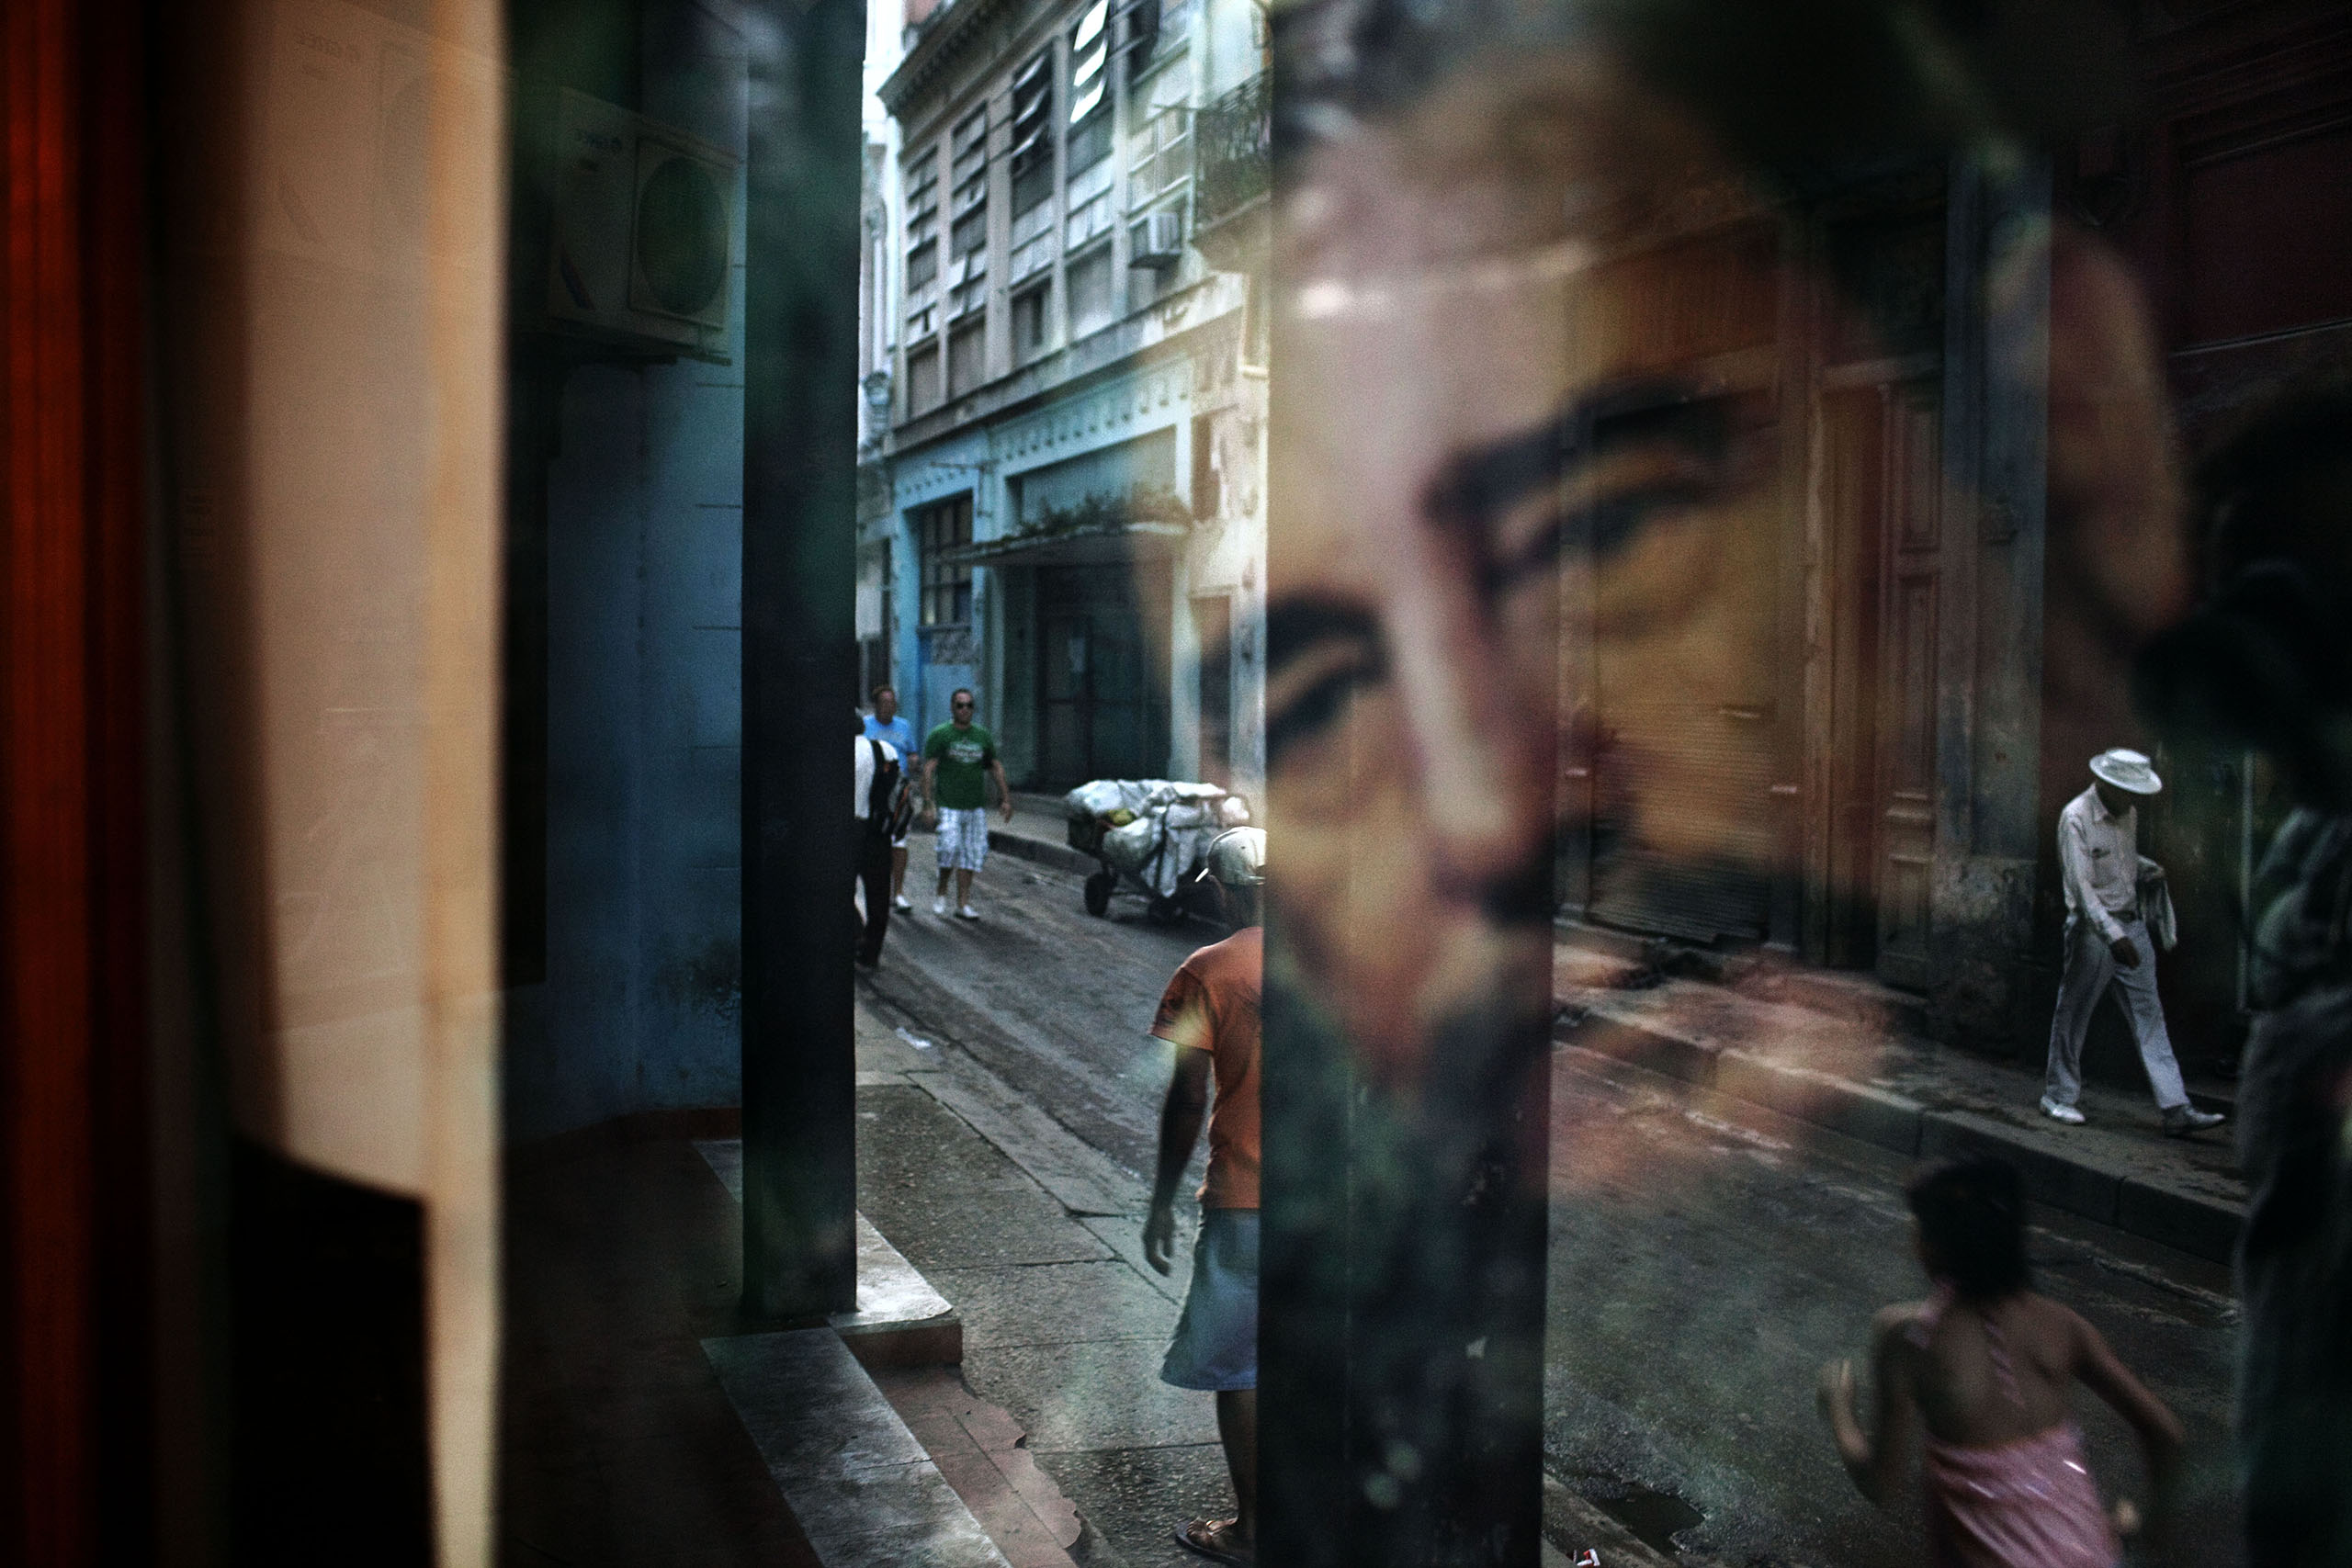 A window reflects an image of Fidel Castro in a working-class Havana neighborhood that attracts few tourists.